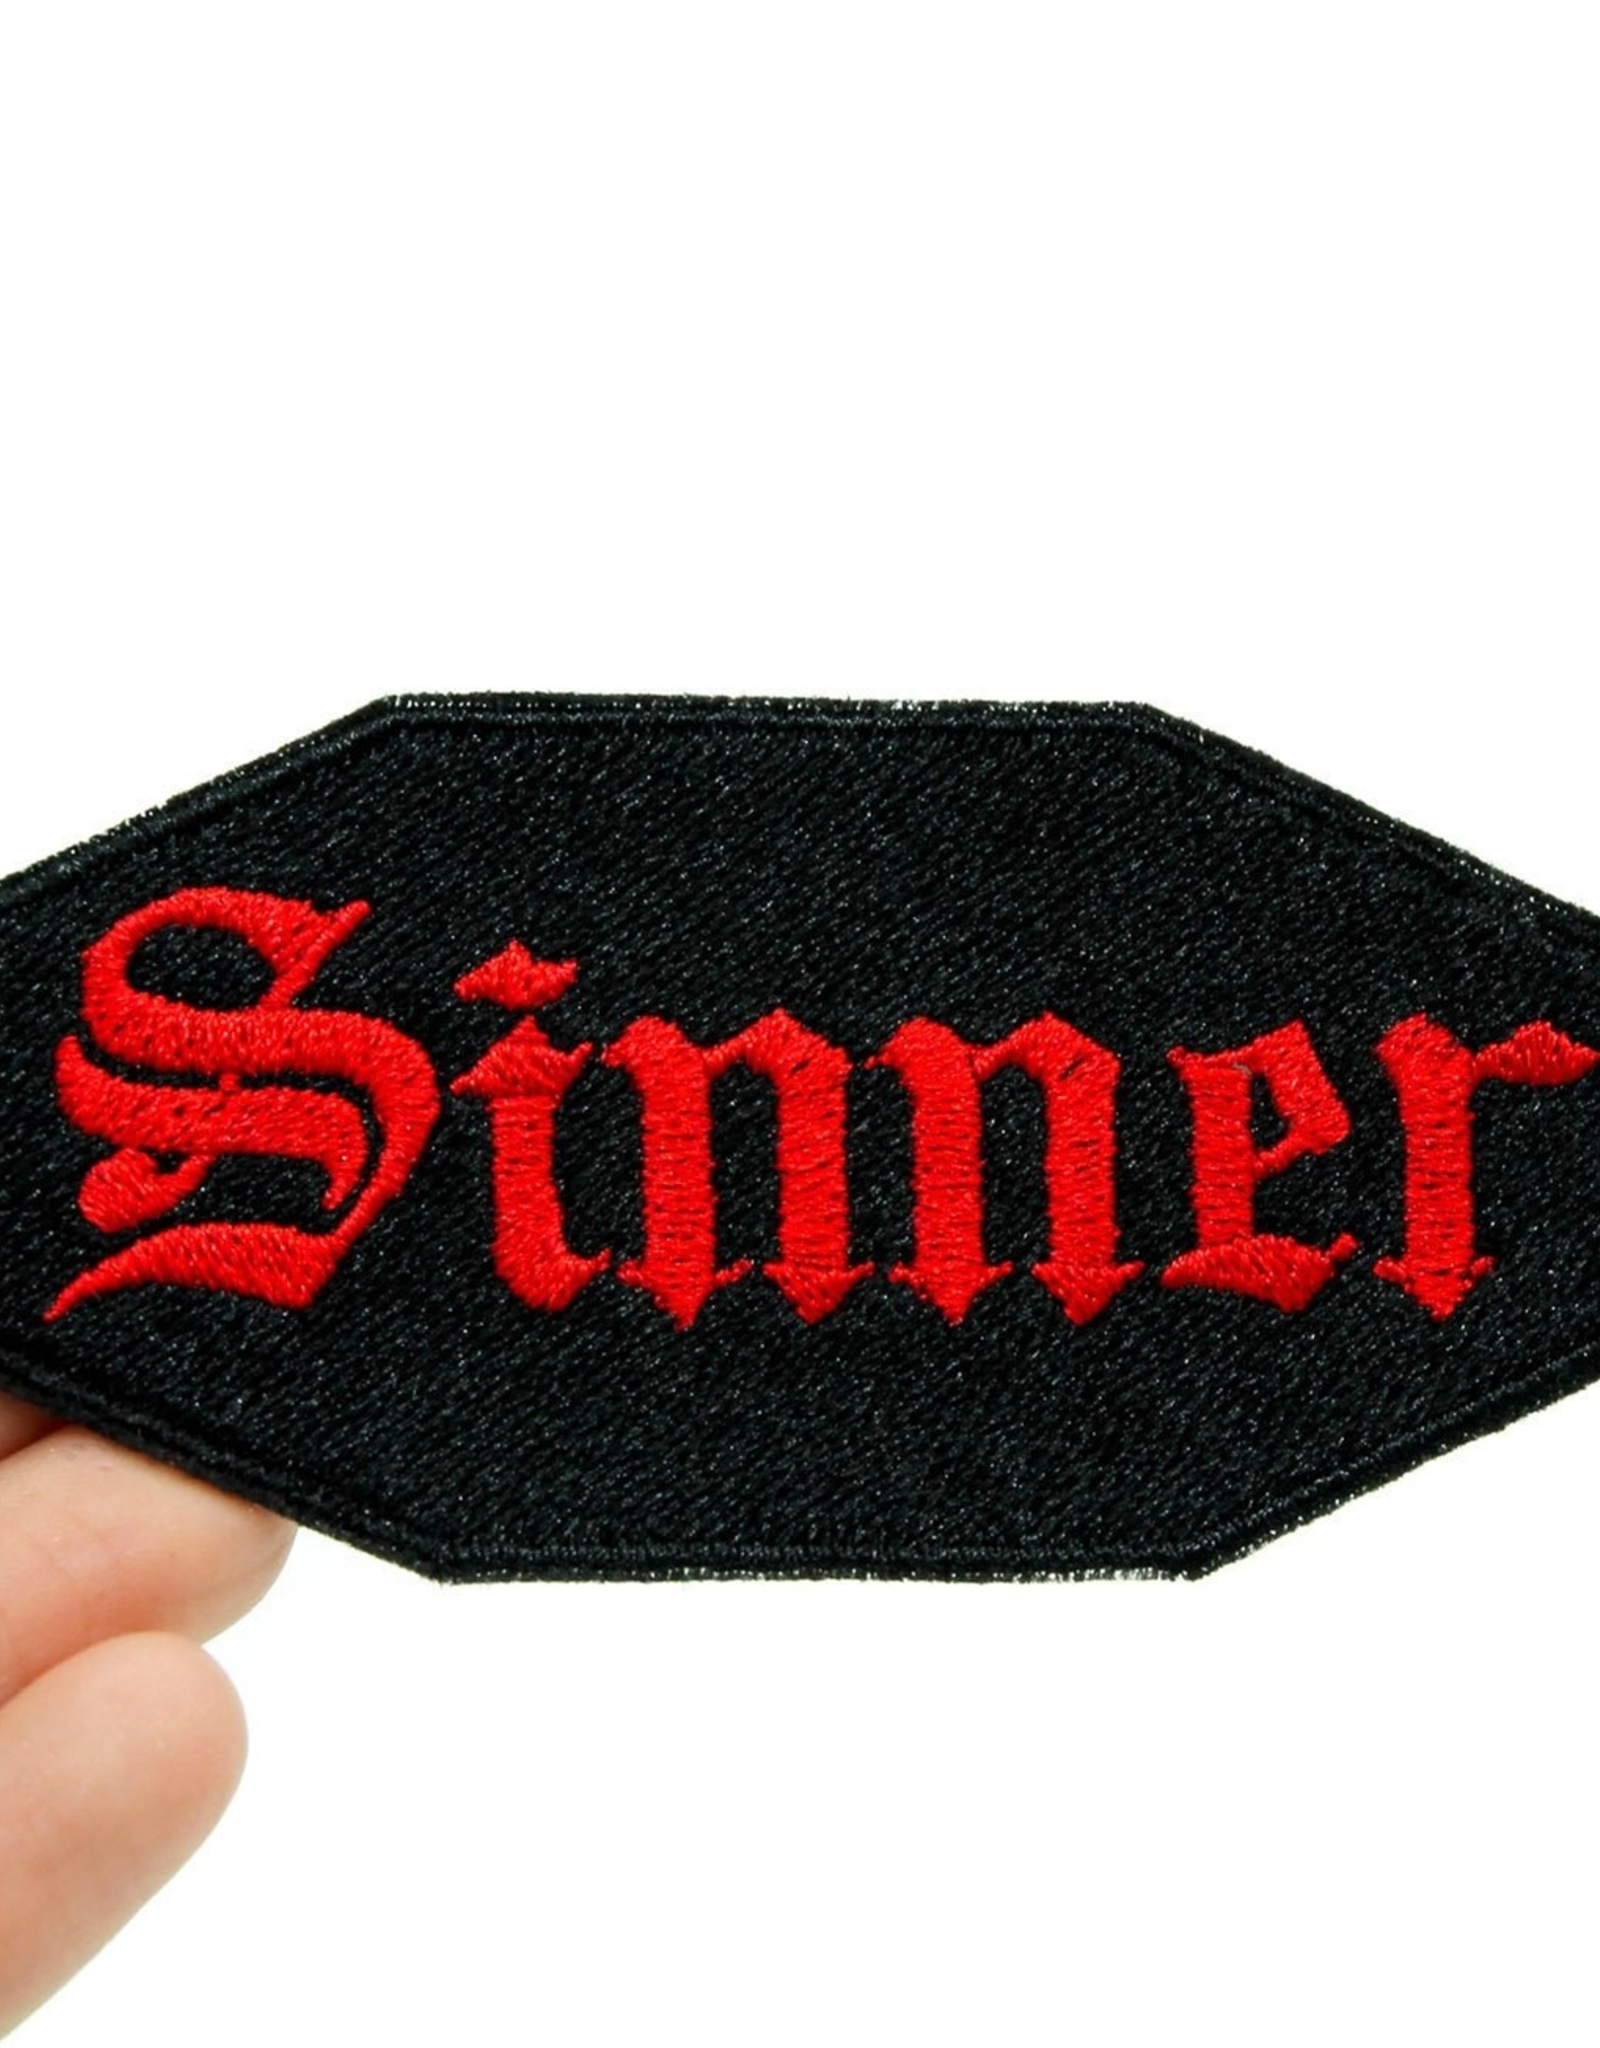 Sinner Embroidered Patch with Iron On Adhesive